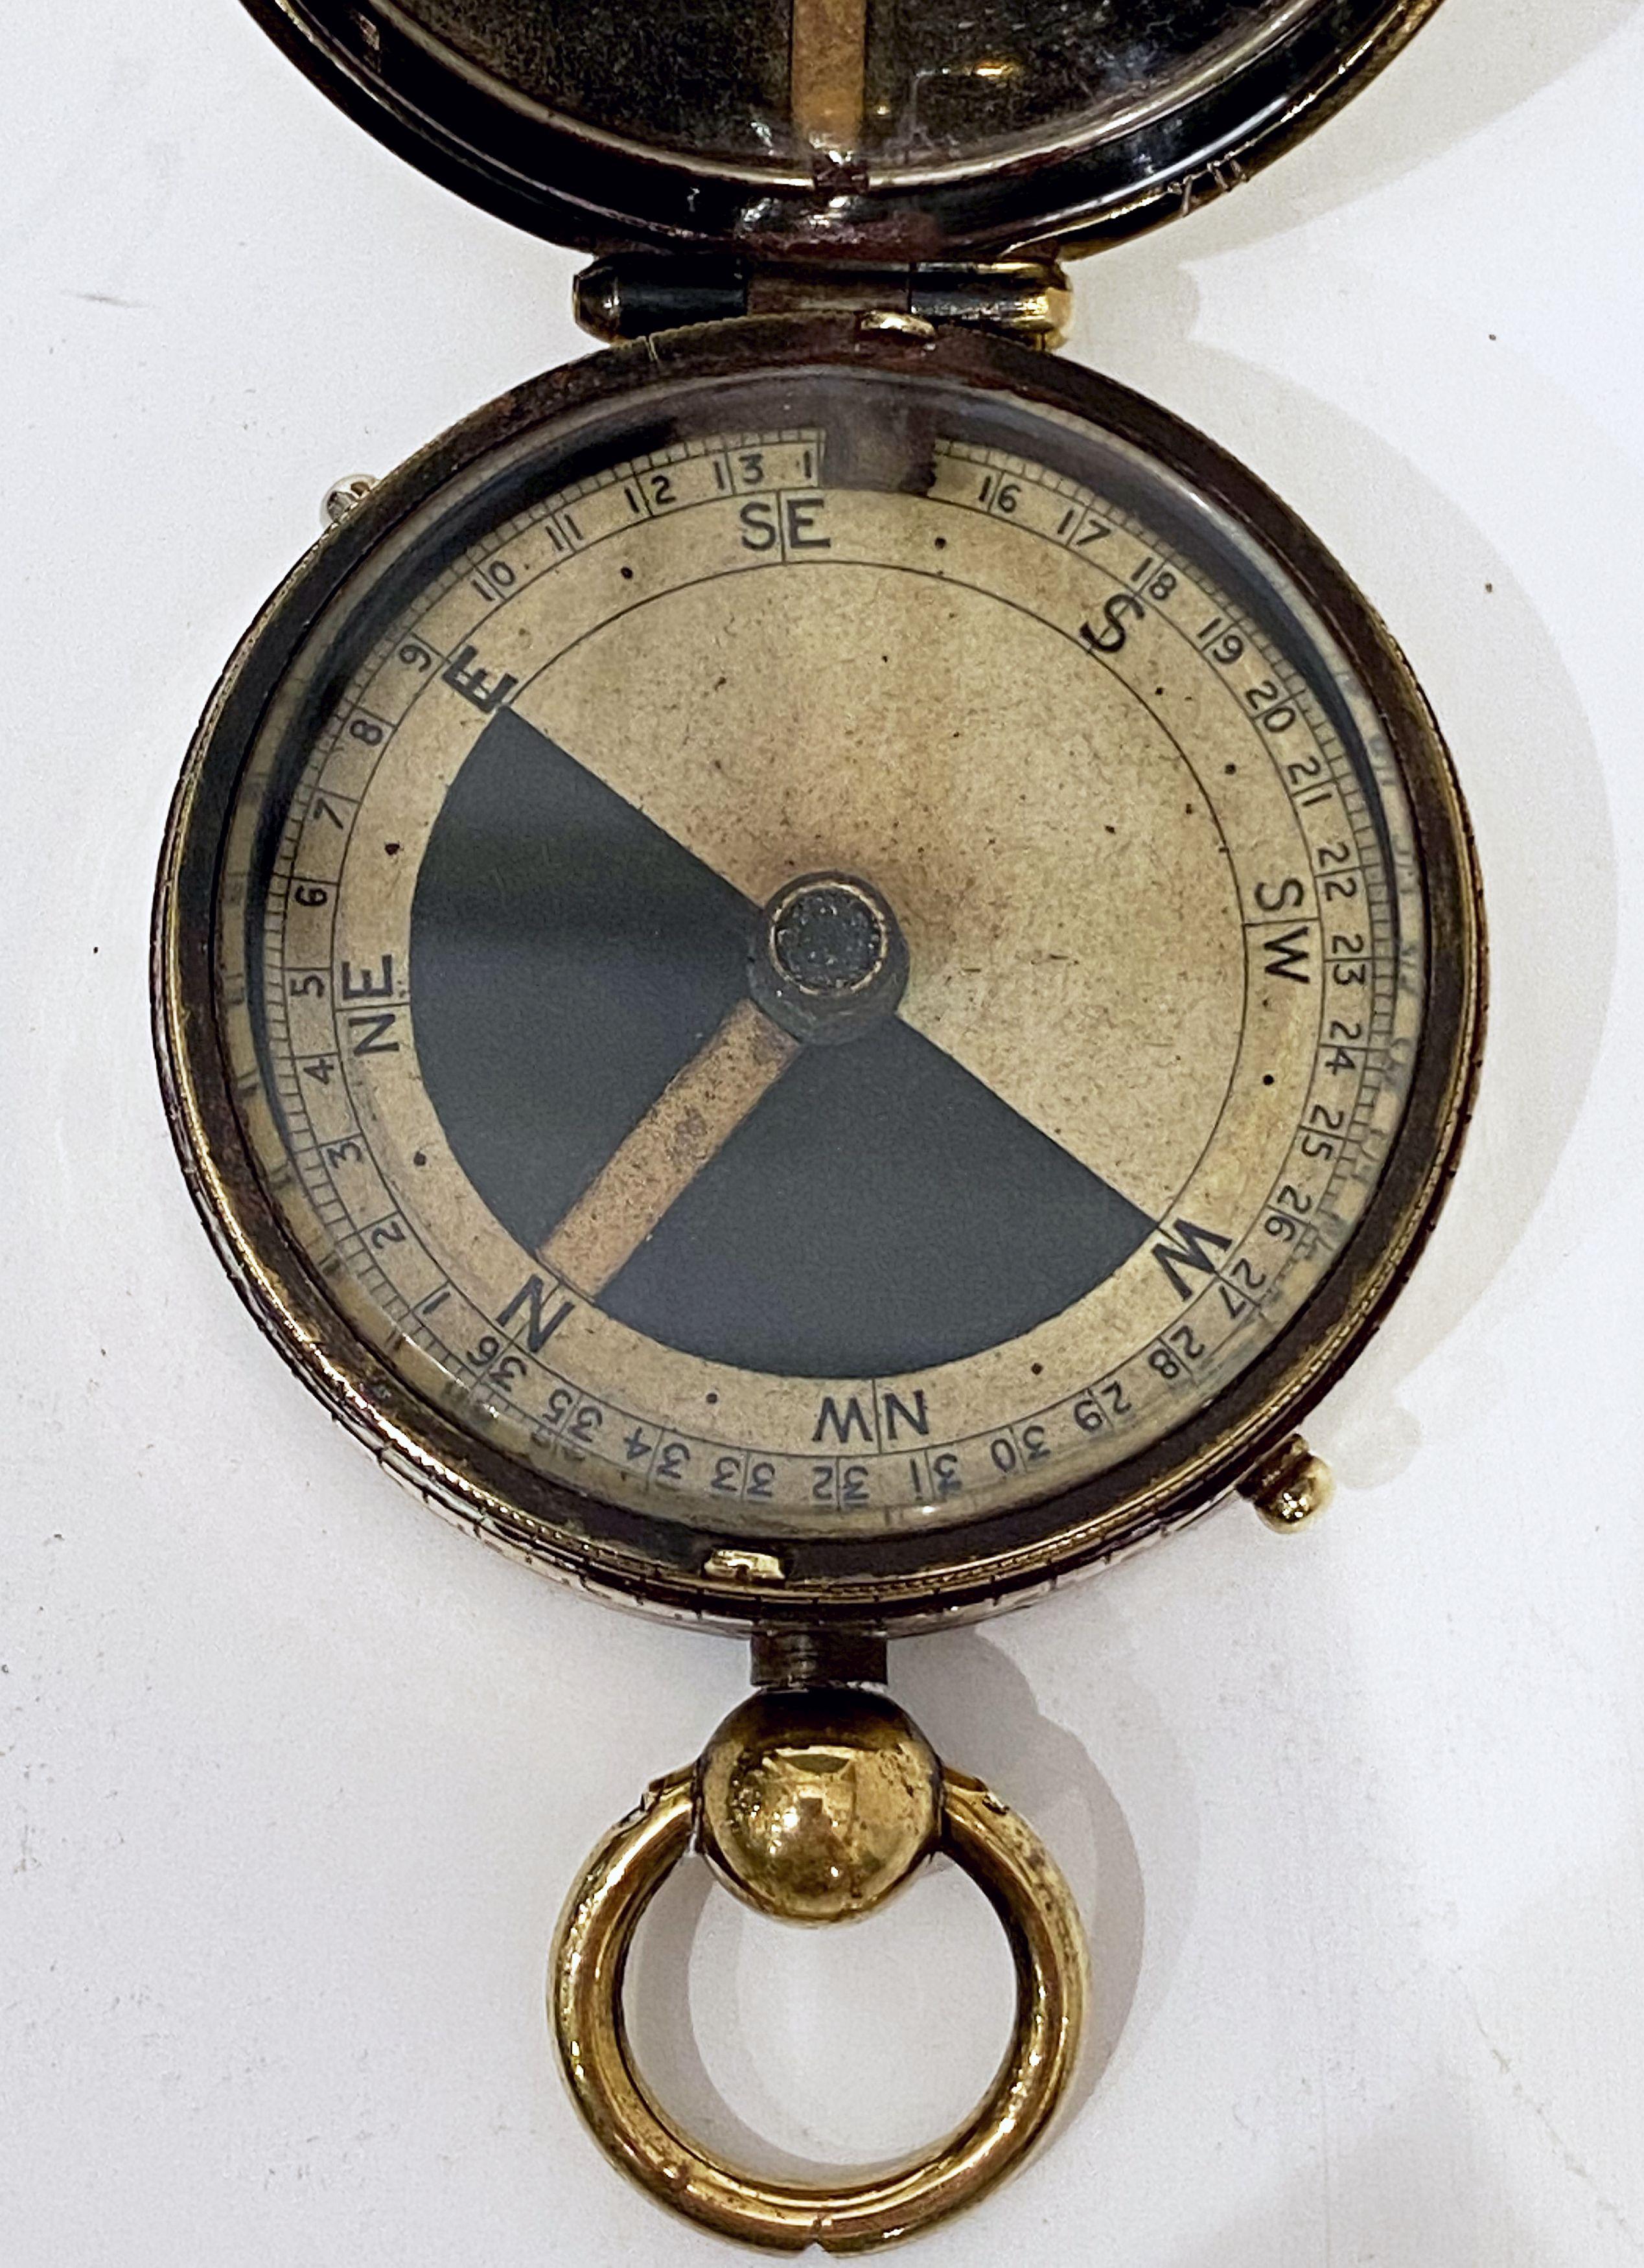 English WWI Military Officer's Marching Compass, Cbynite Radium Compass